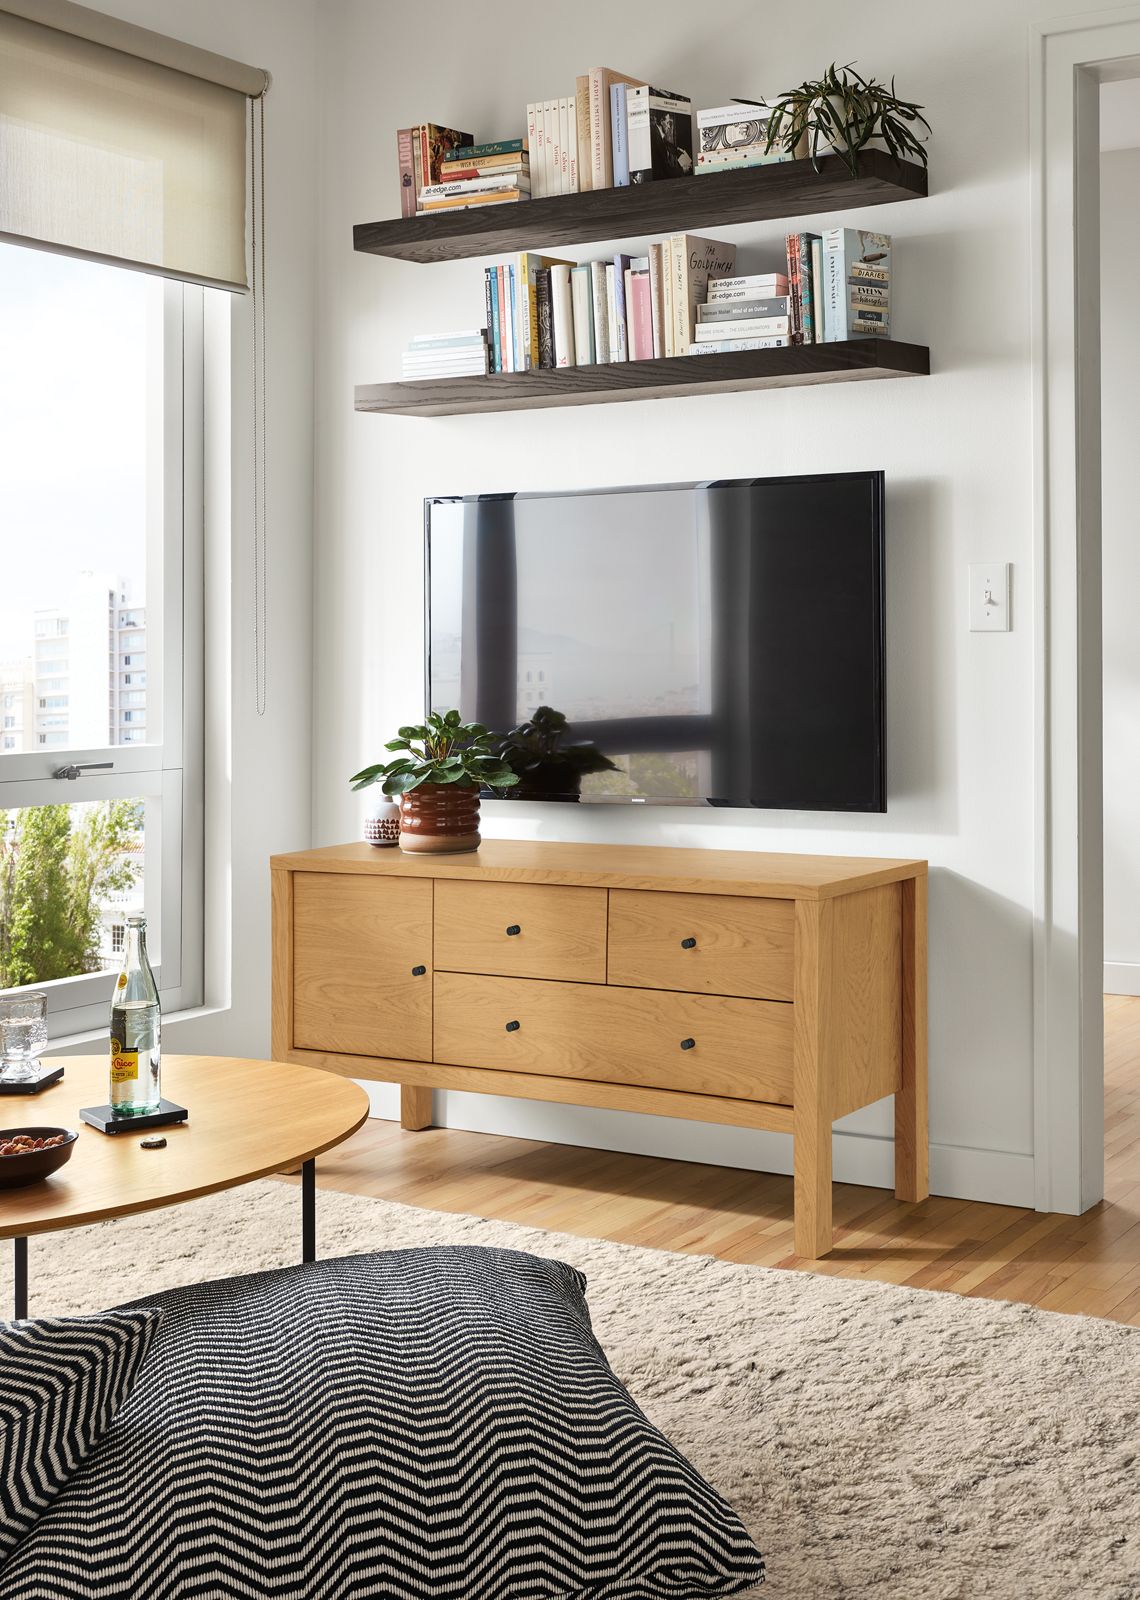 Room setting featuring the Emerson 48-wide media cabinet in white oak.